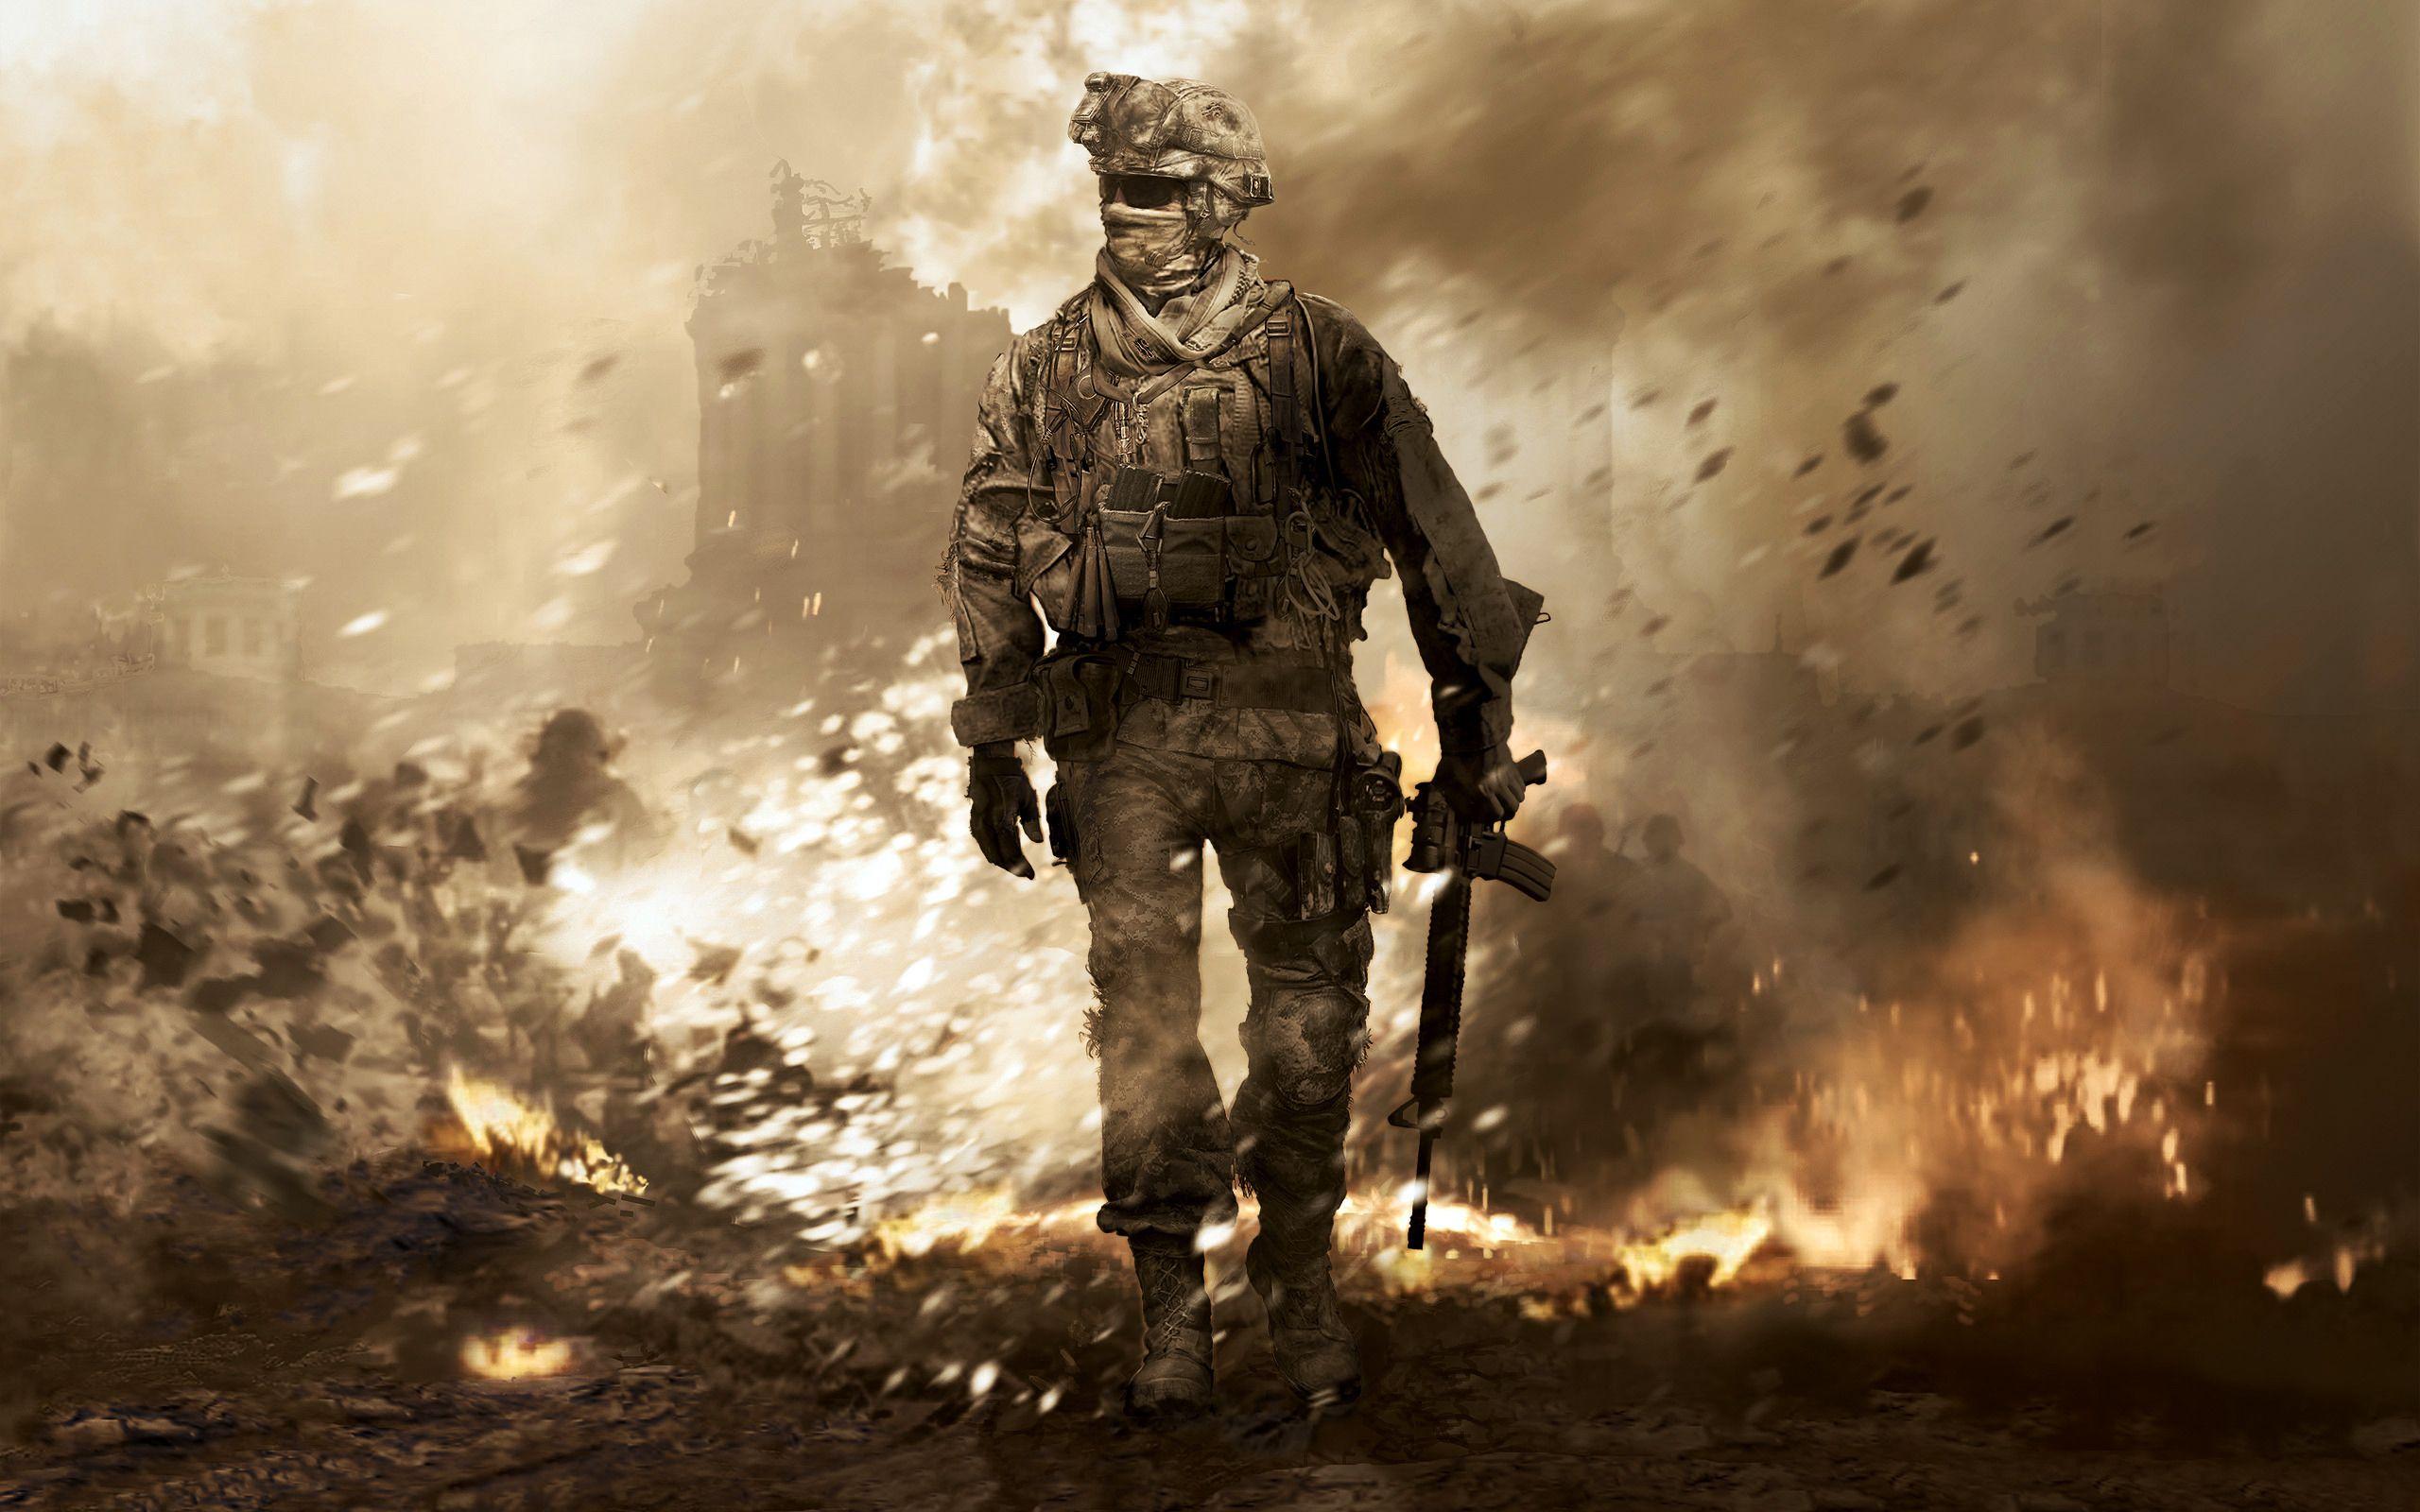 Cool Call of Duty Wallpaper Free Cool Call of Duty